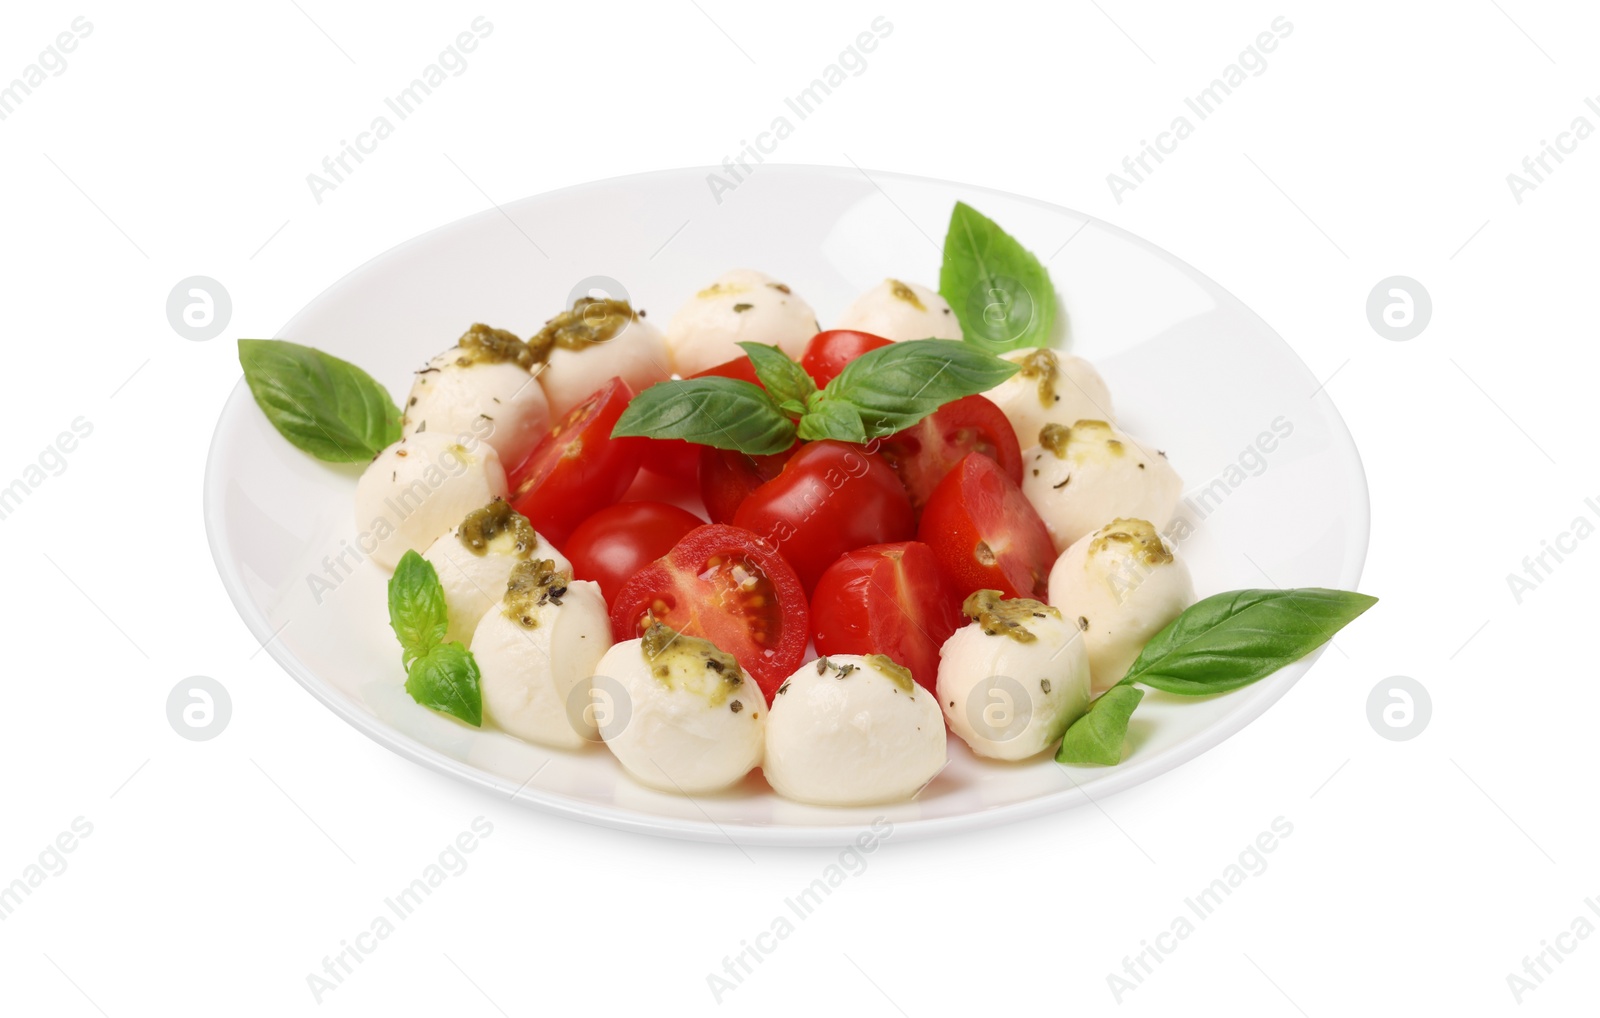 Photo of Plate of tasty Caprese salad with mozzarella, tomatoes, basil and pesto sauce isolated on white